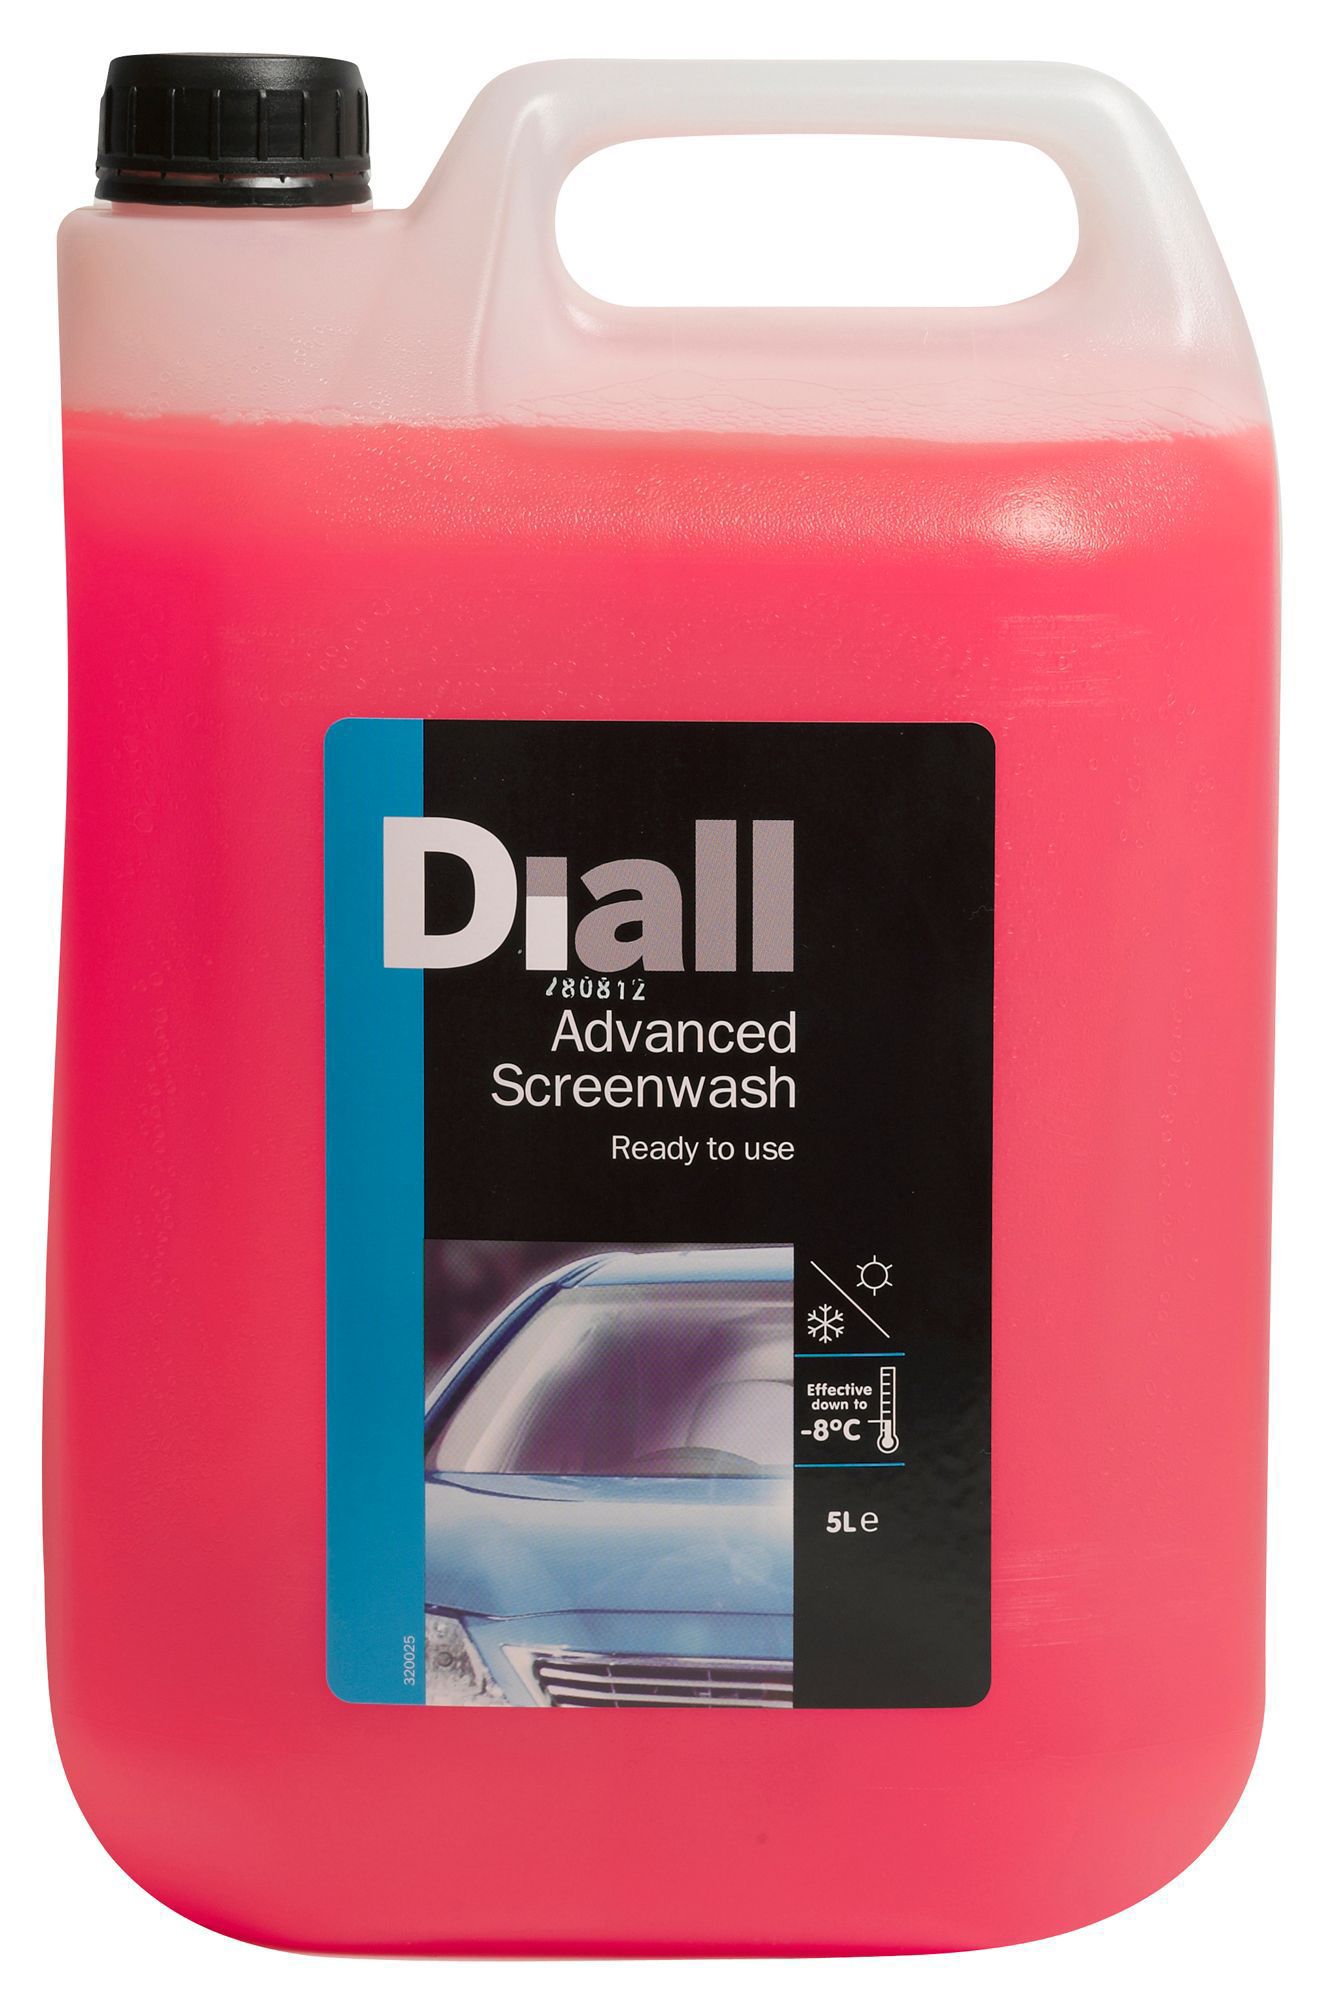 Diall Advanced Screenwash, 5L Jerry can